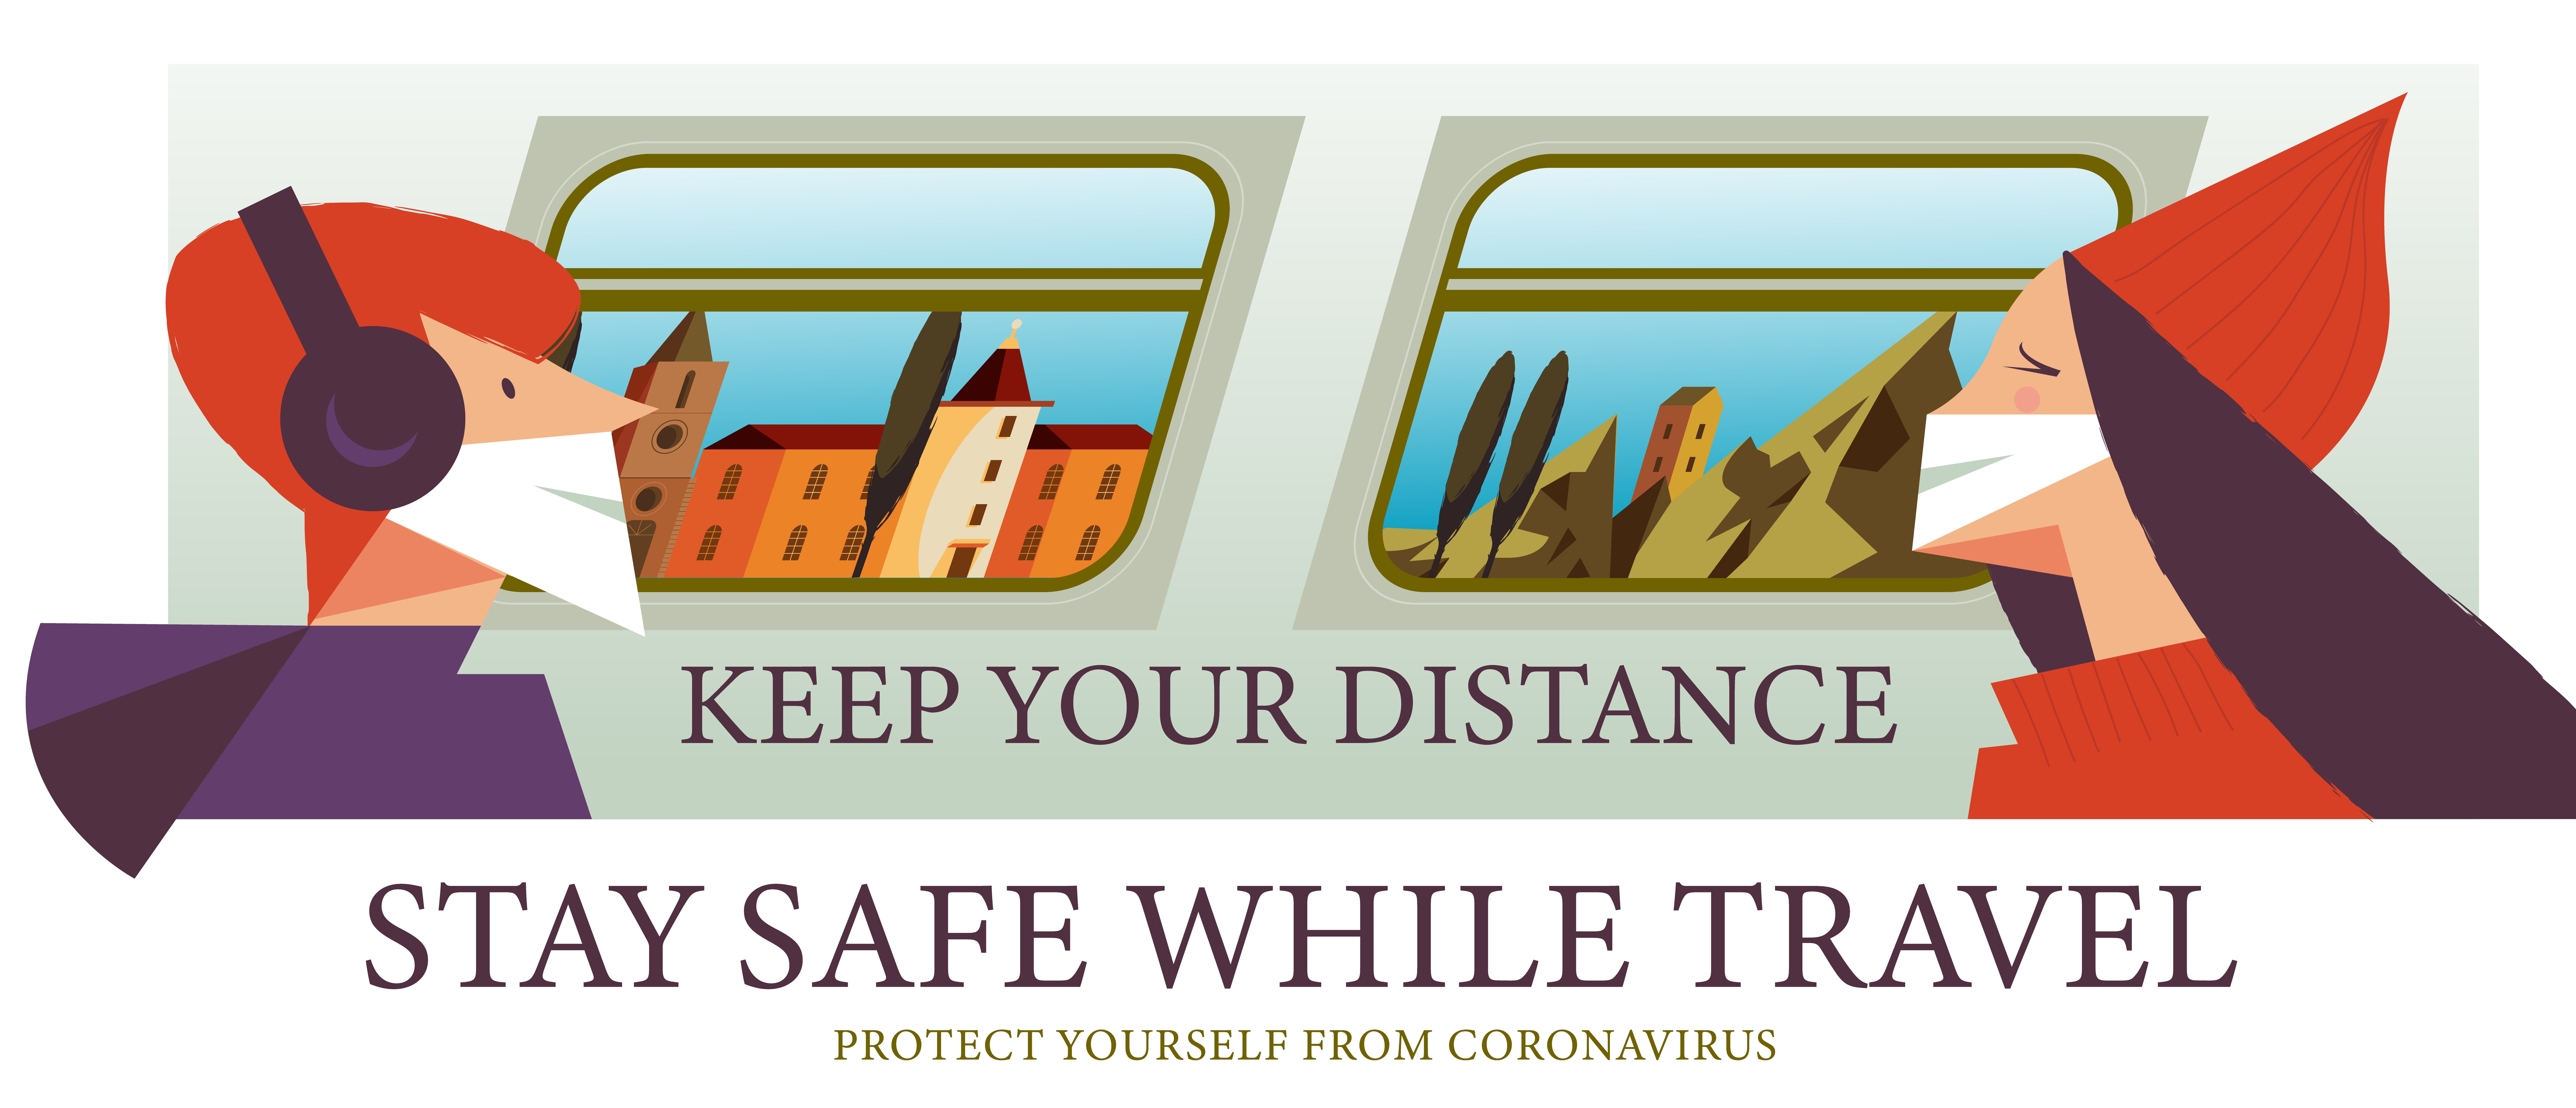 Stay safe while traveling. Vector poster encouraging people to wear masks. Men and women in medical masks ride on the train.. Stay safe while traveling. Vector poster encouraging people to wear masks.